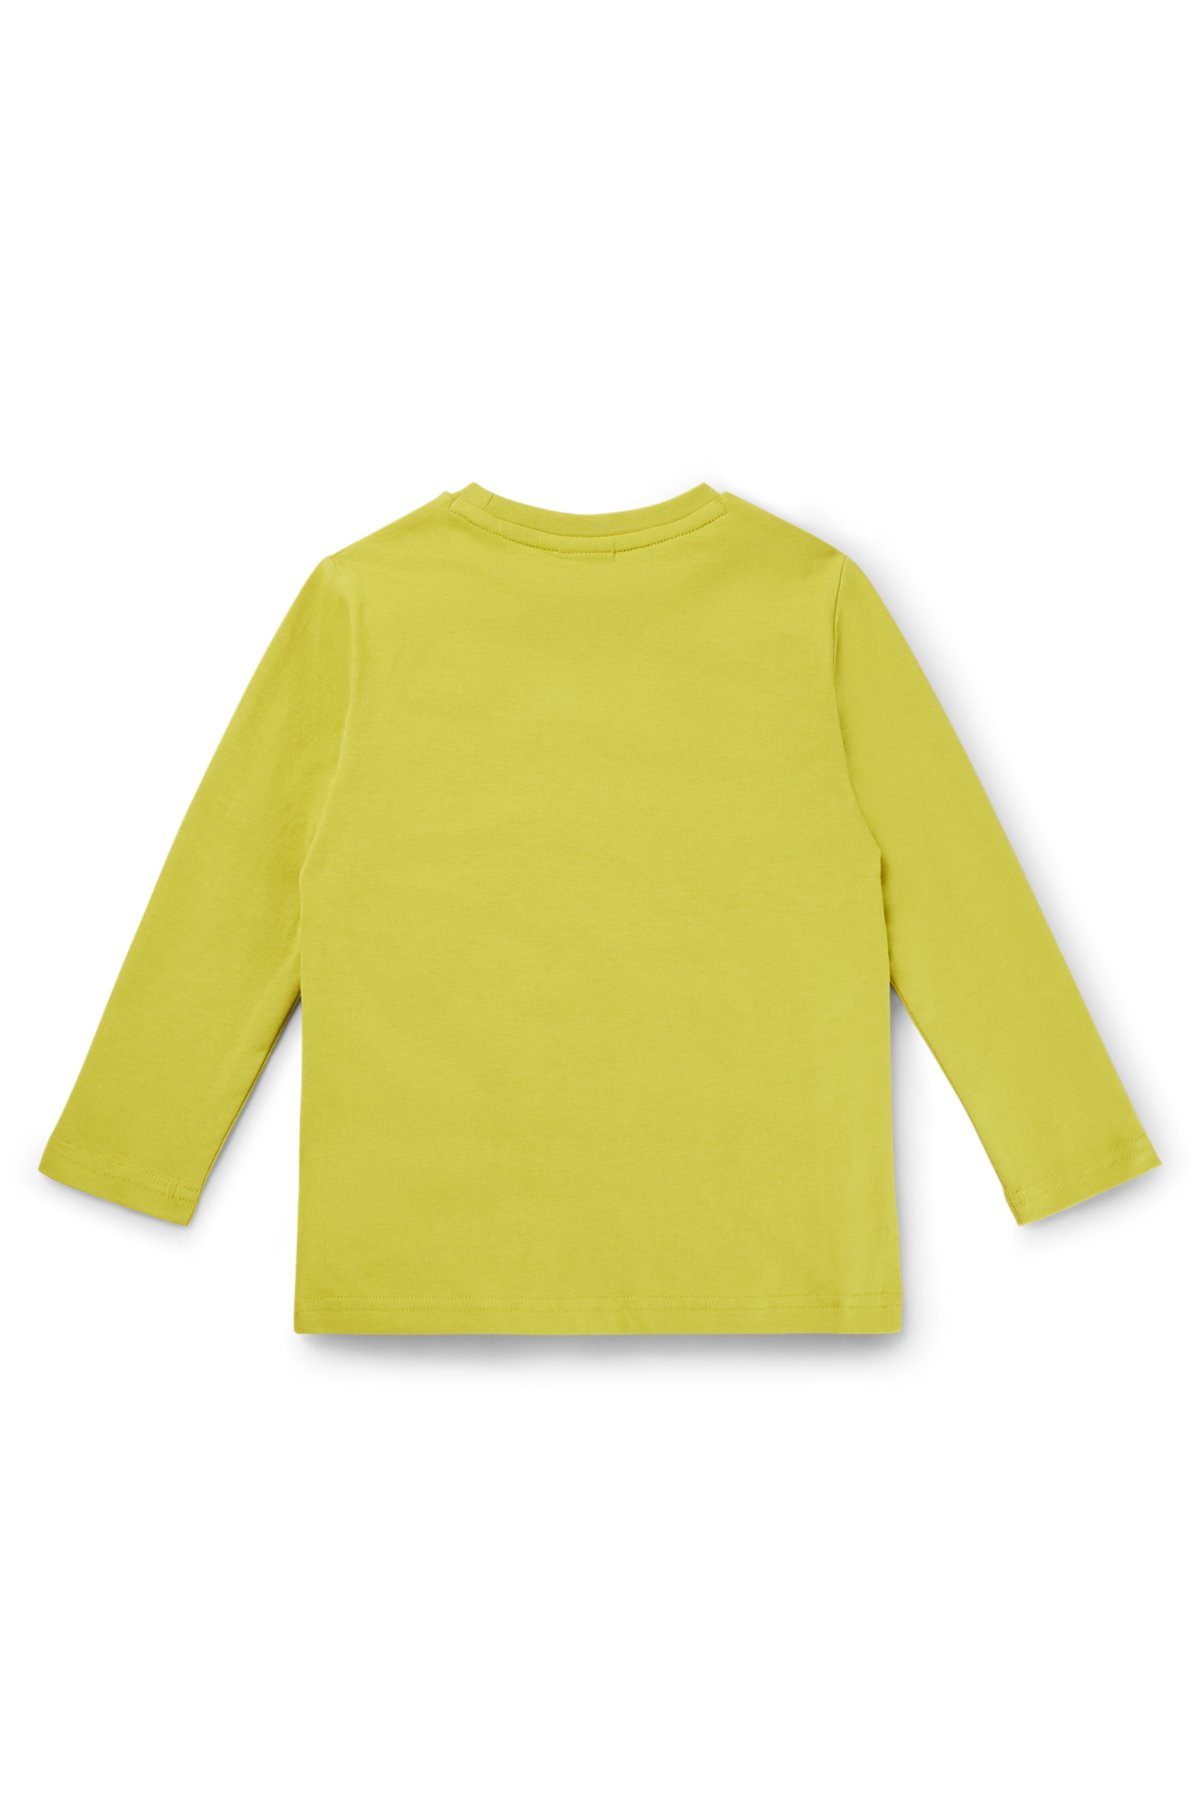 BOSS - Kids' long-sleeved T-shirt in cotton with logo print